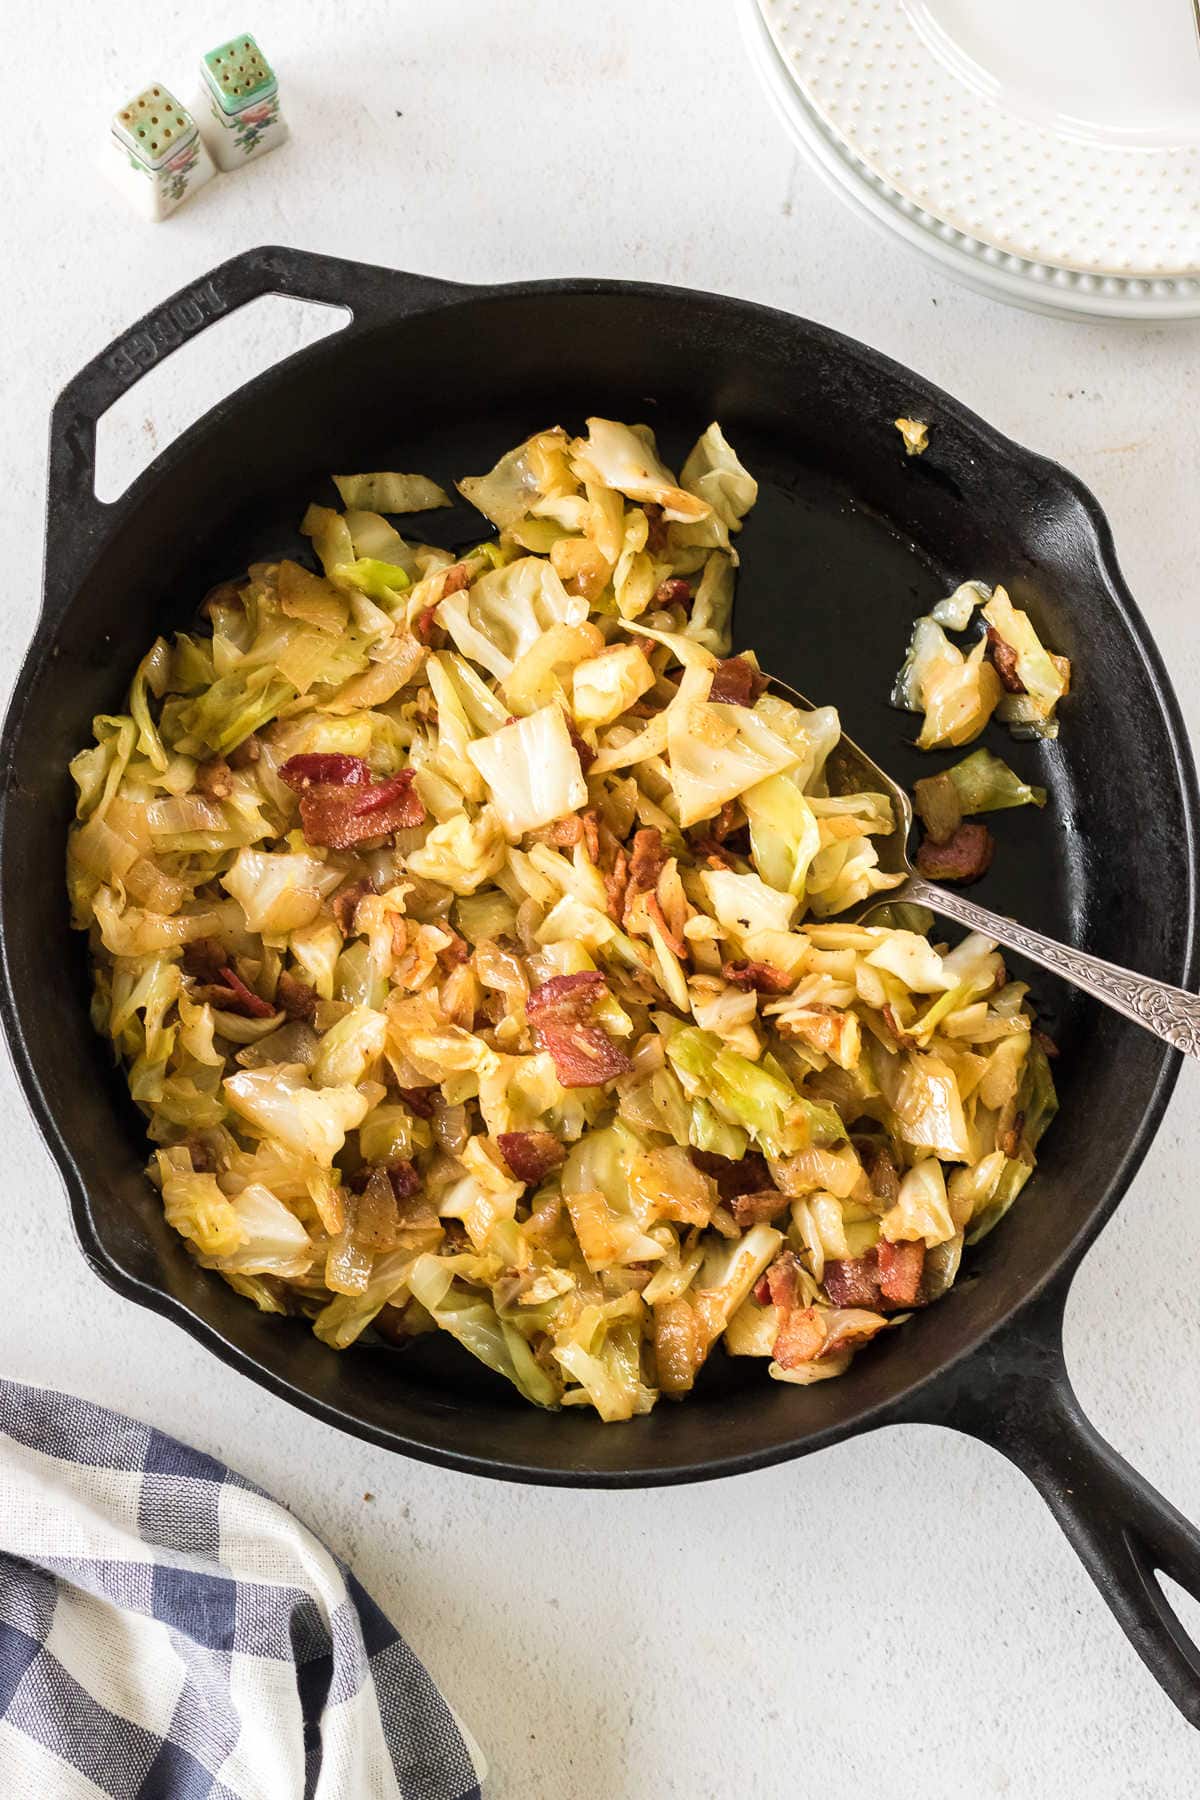 Overhead view of cabbage and bacon in an iron skillet.